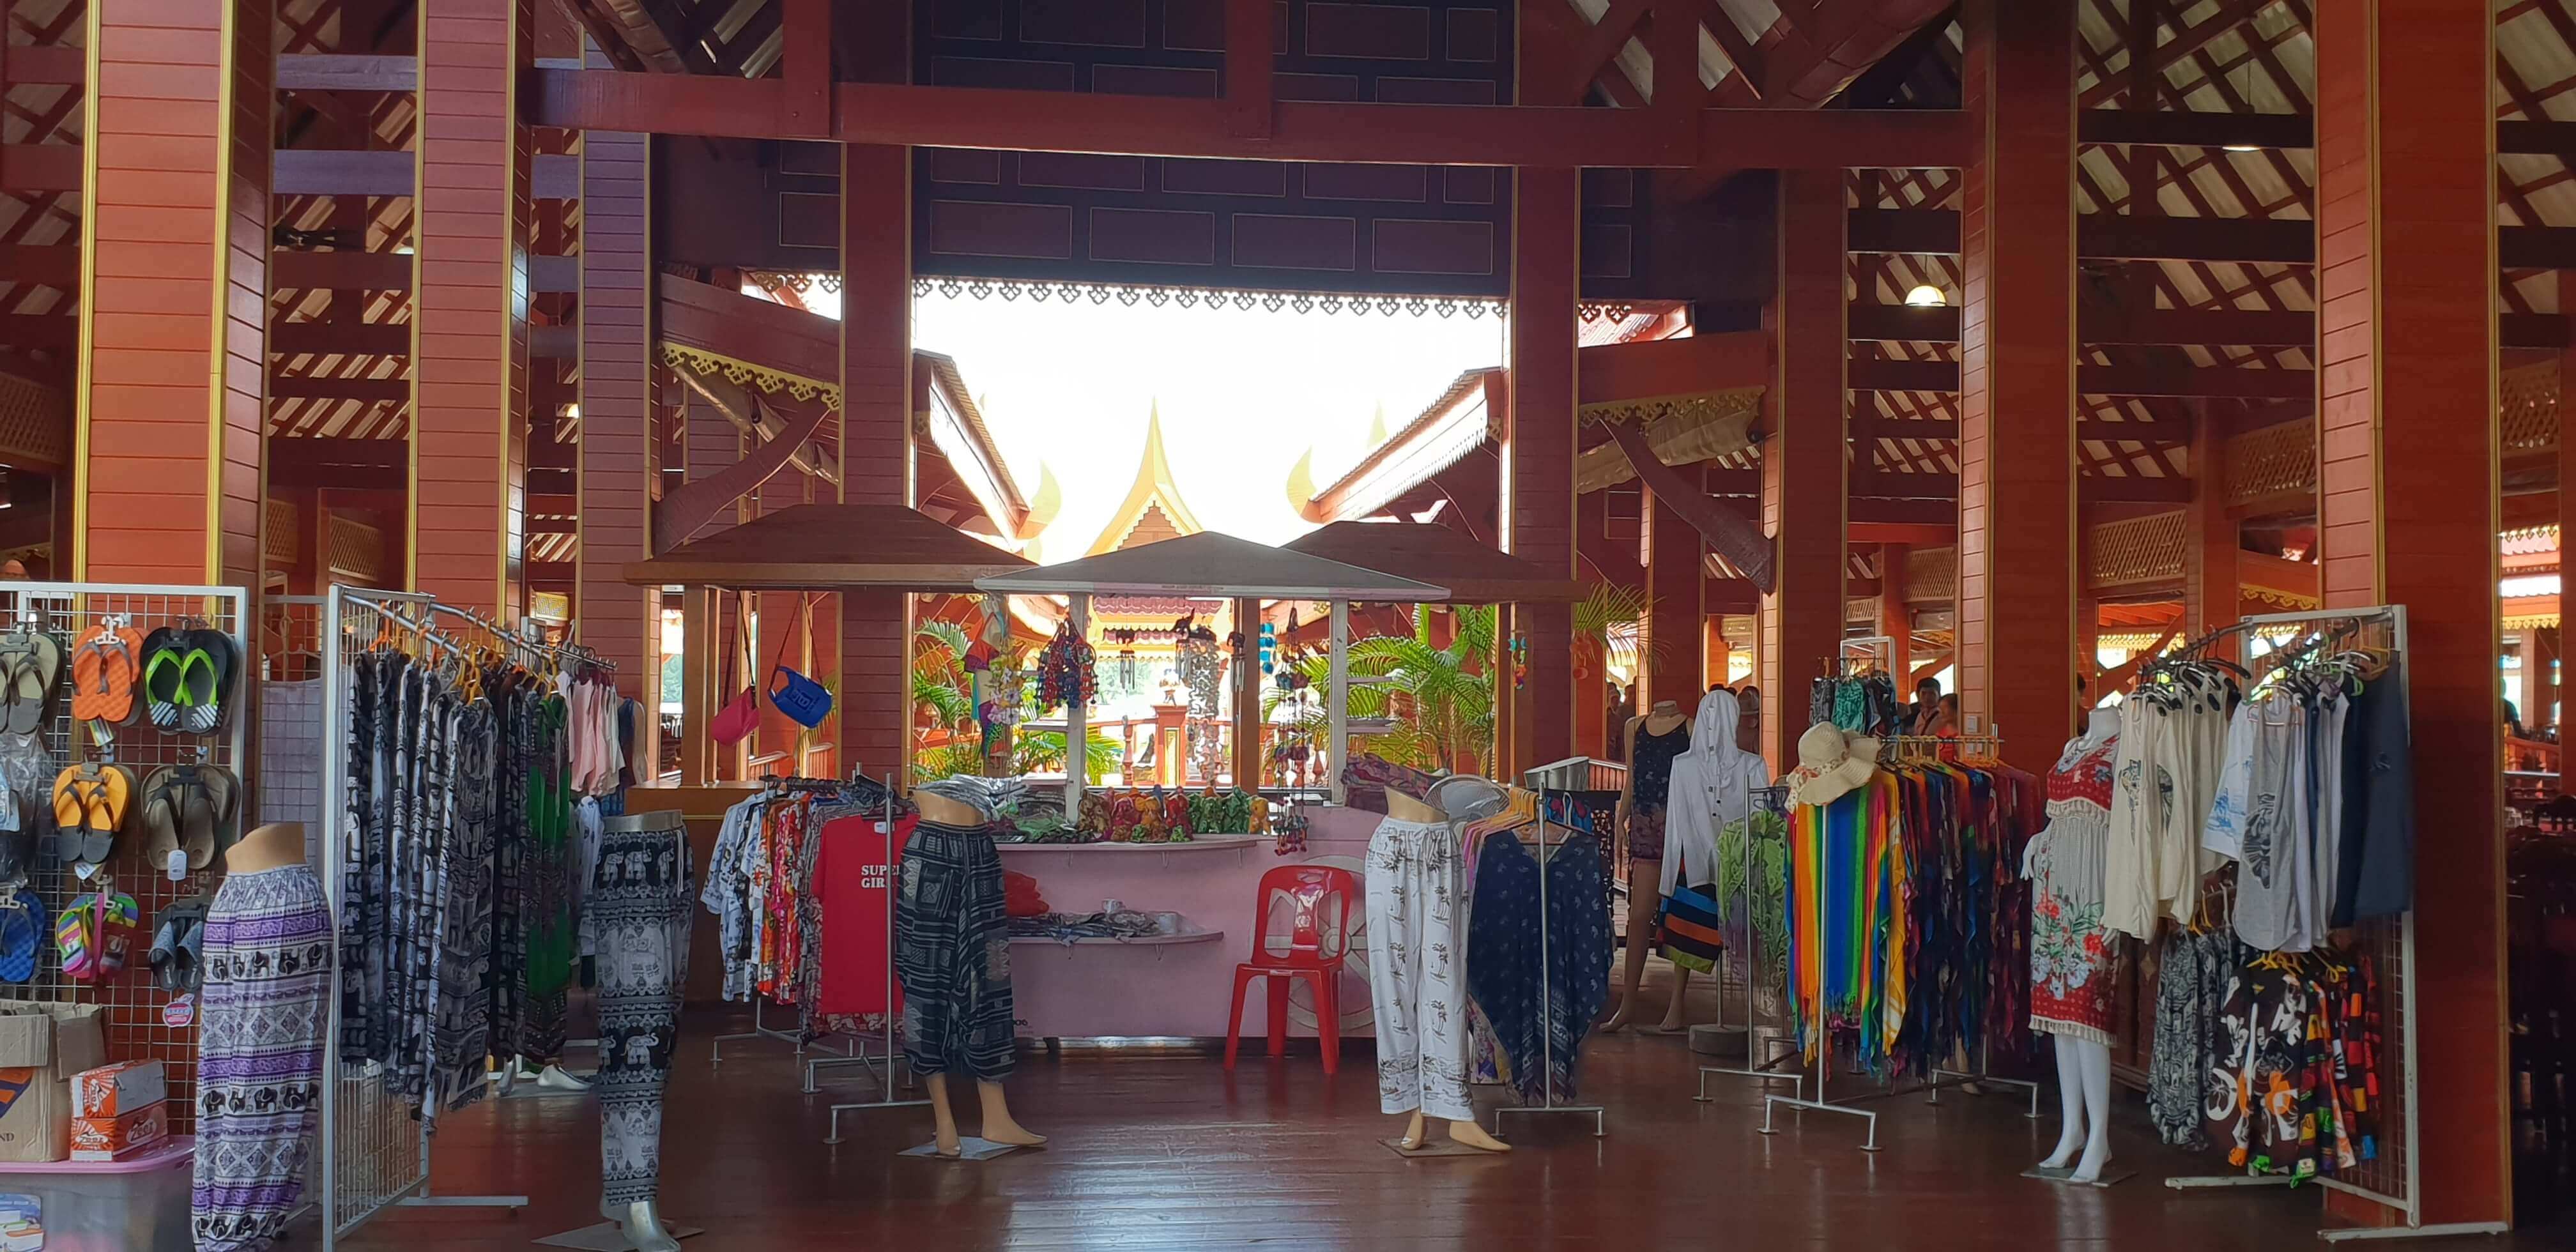 You can shop at the store inside the lunch complex at Panyee island